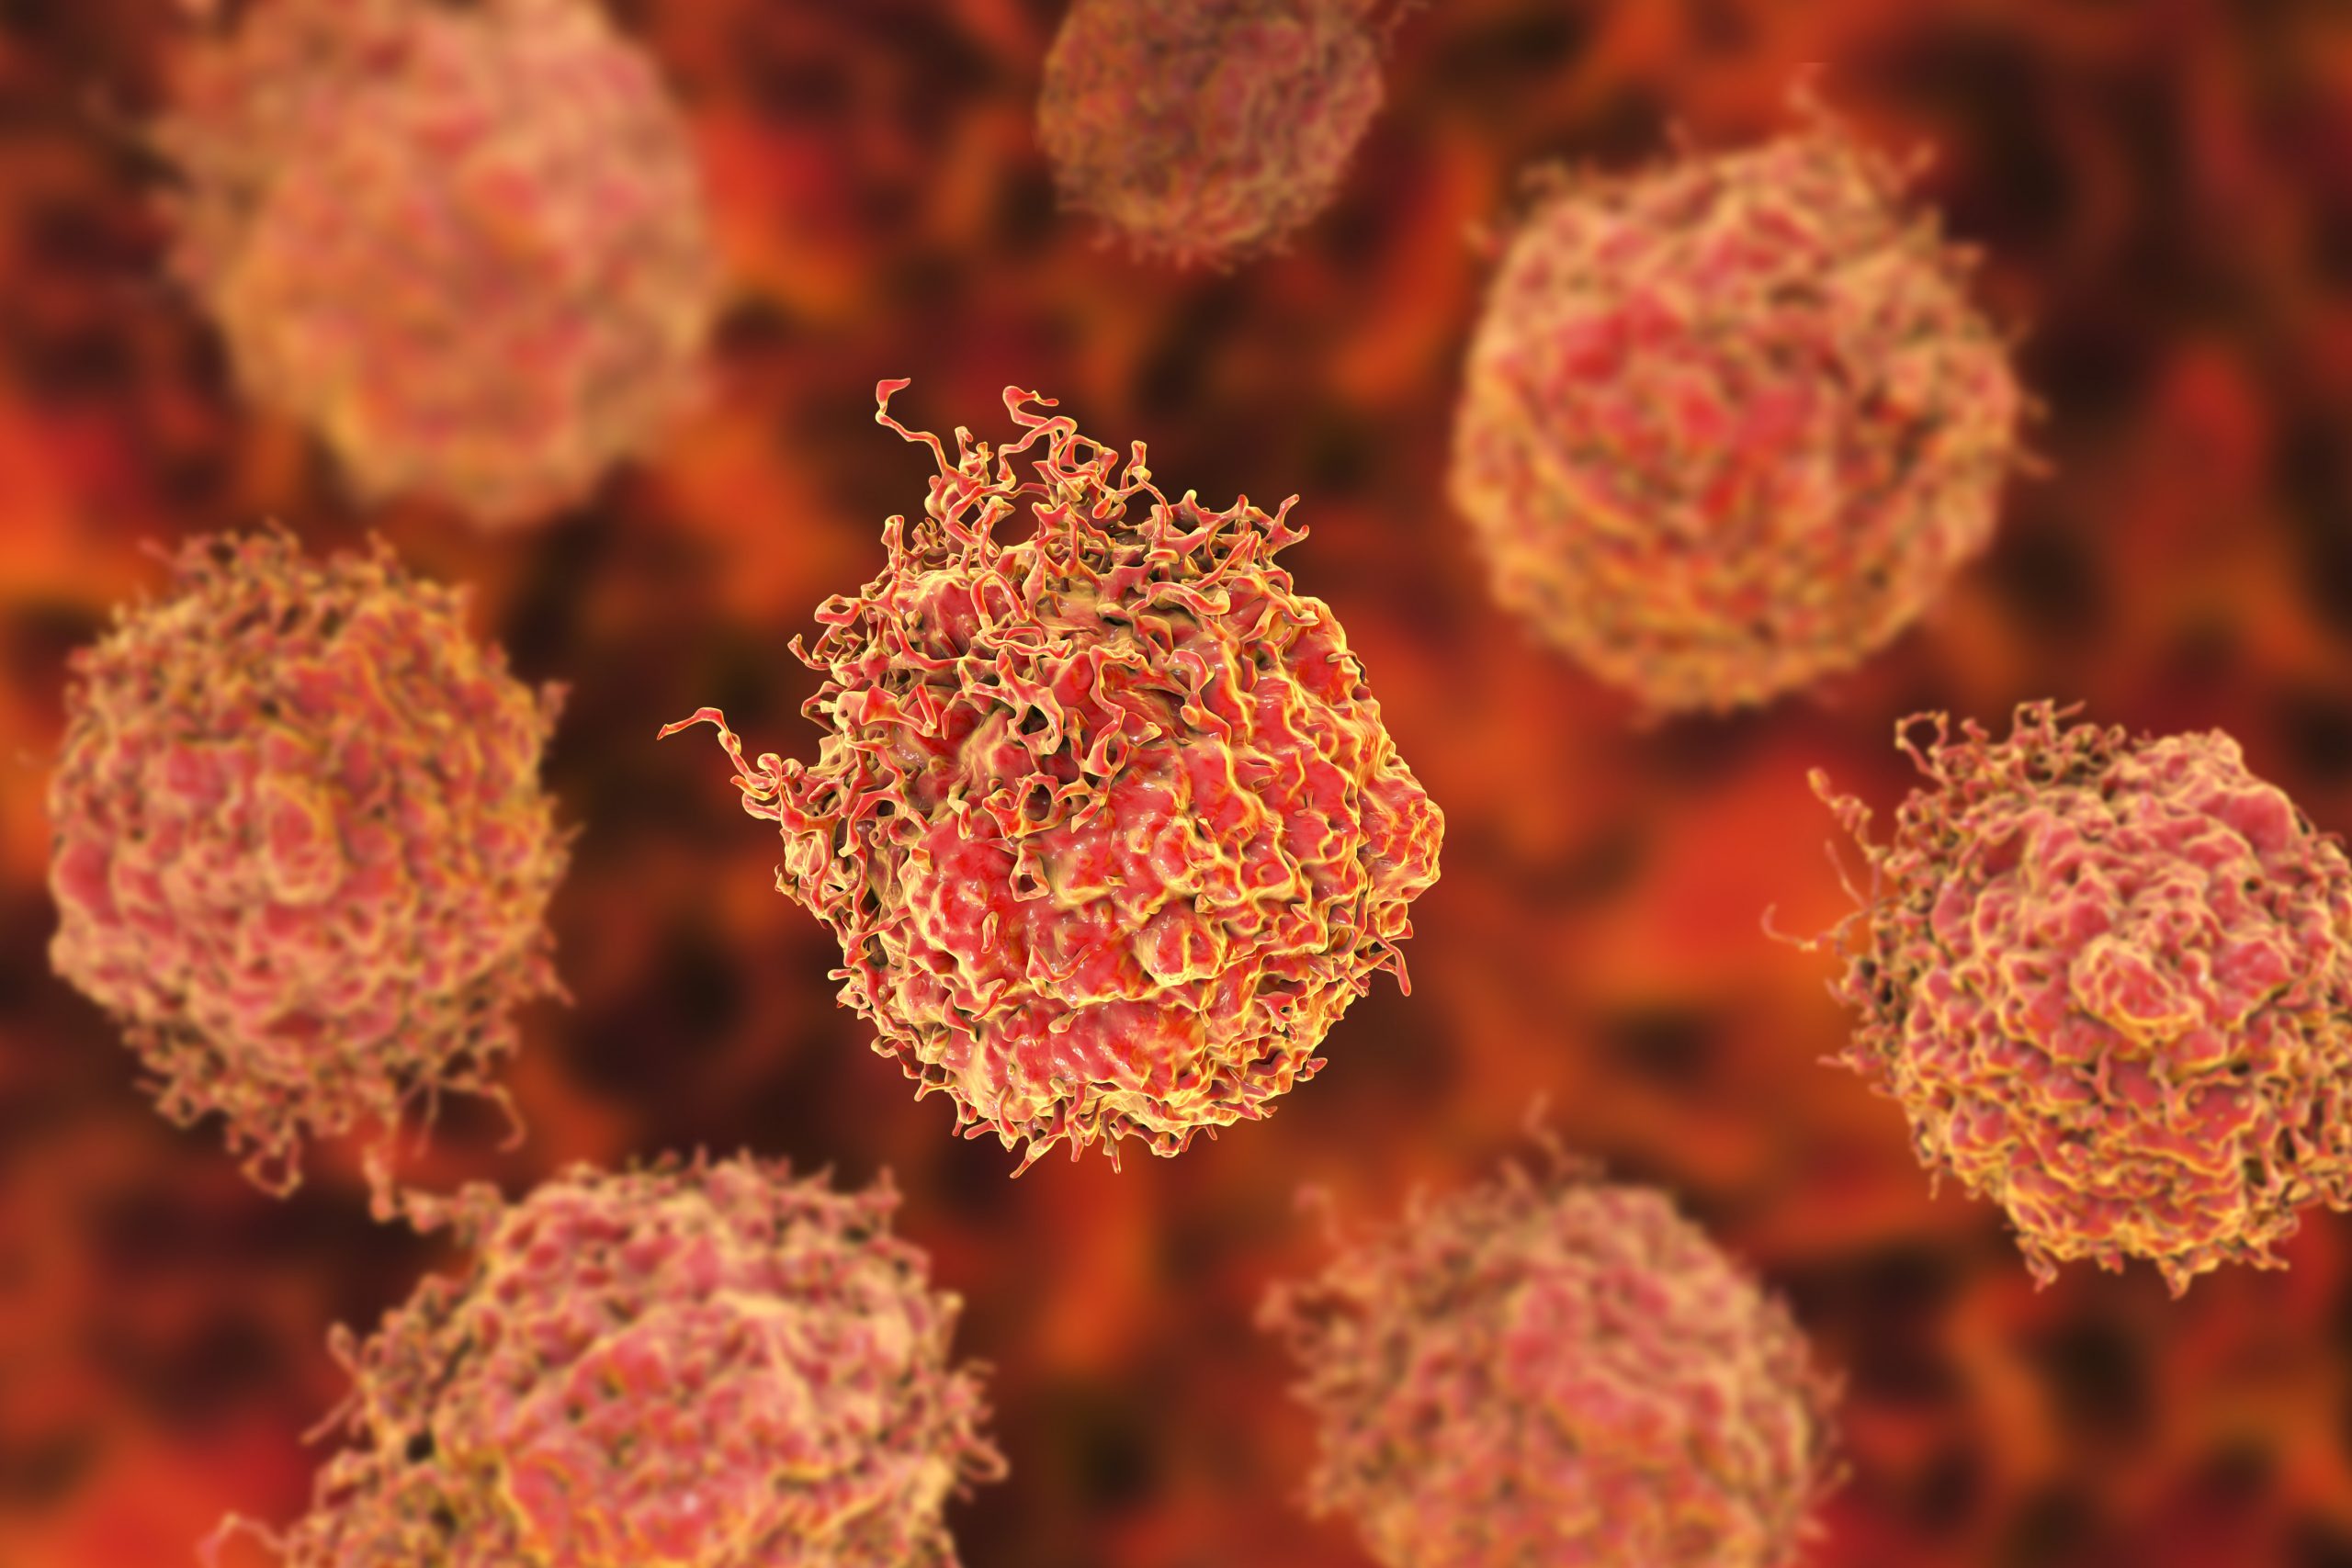 3D rendering of an artists impression of cancer cells